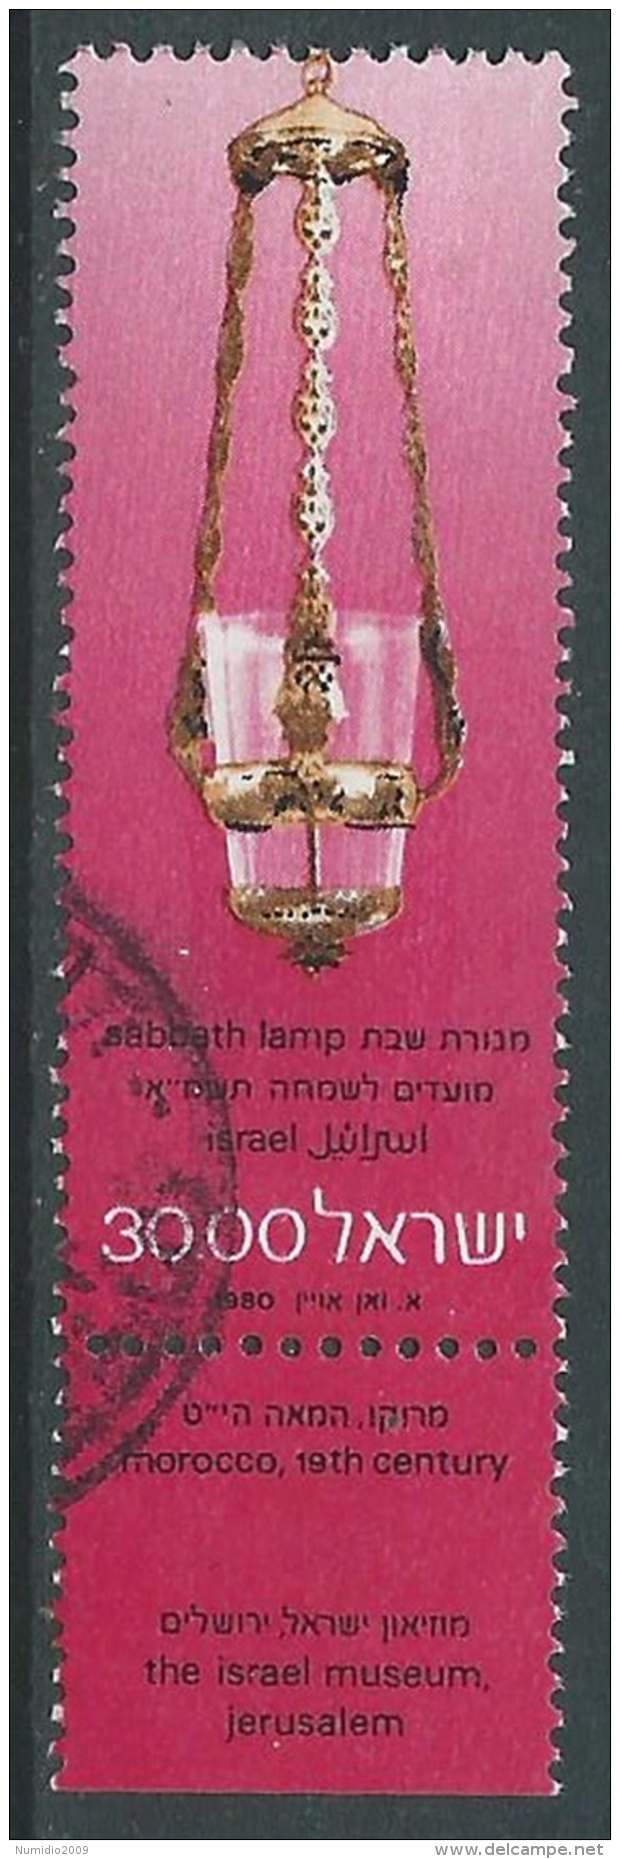 1980 ISRAELE USATO NUOVO ANNO 5741 30,00 CON APPENDICE - T18-5 - Used Stamps (with Tabs)